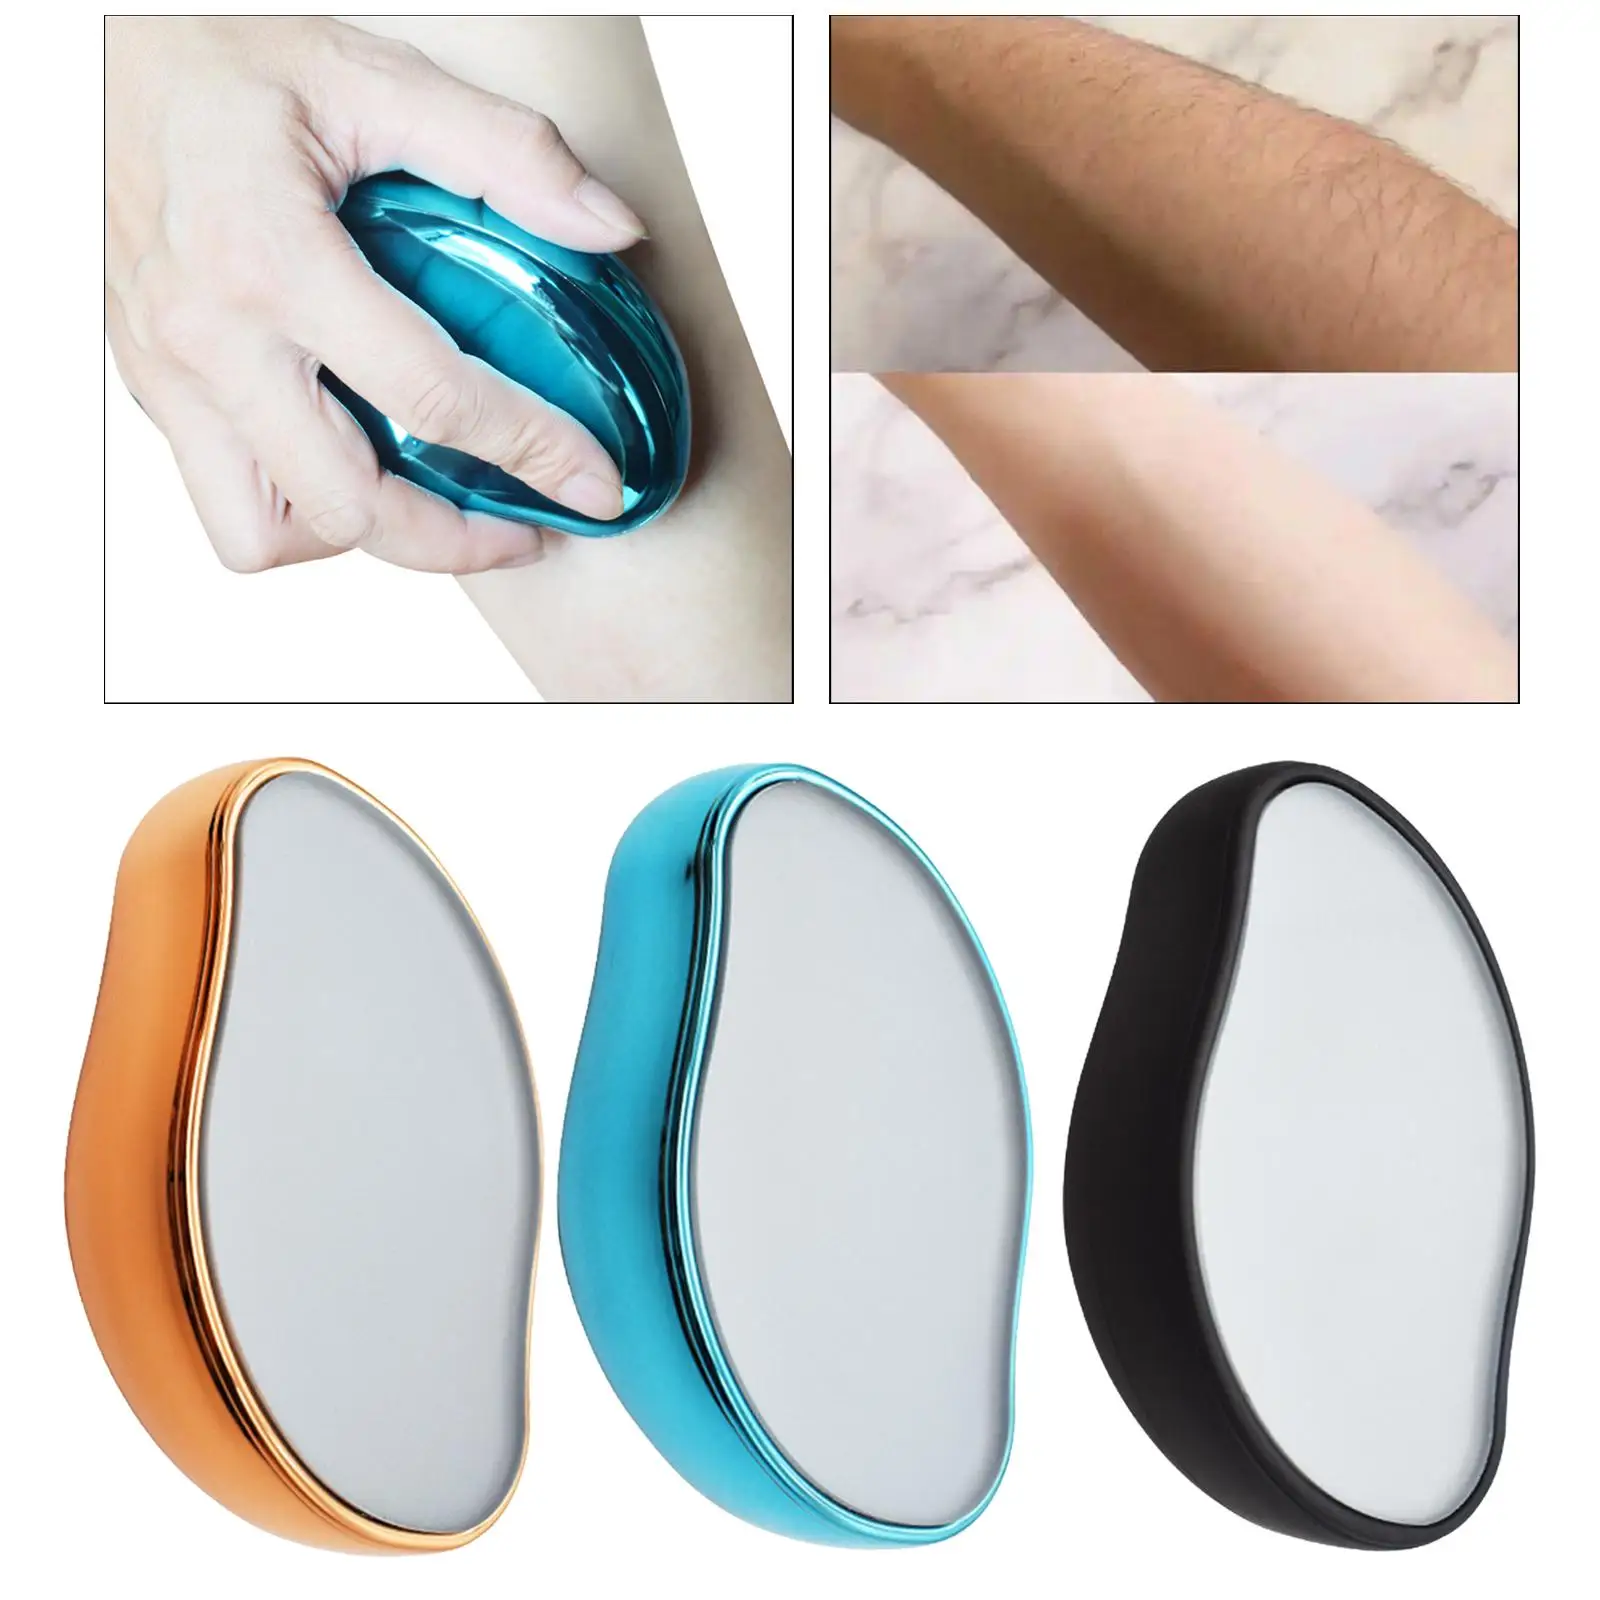 Painless Physical Hair Removal Epilators Exfoliation for Back Women and Men